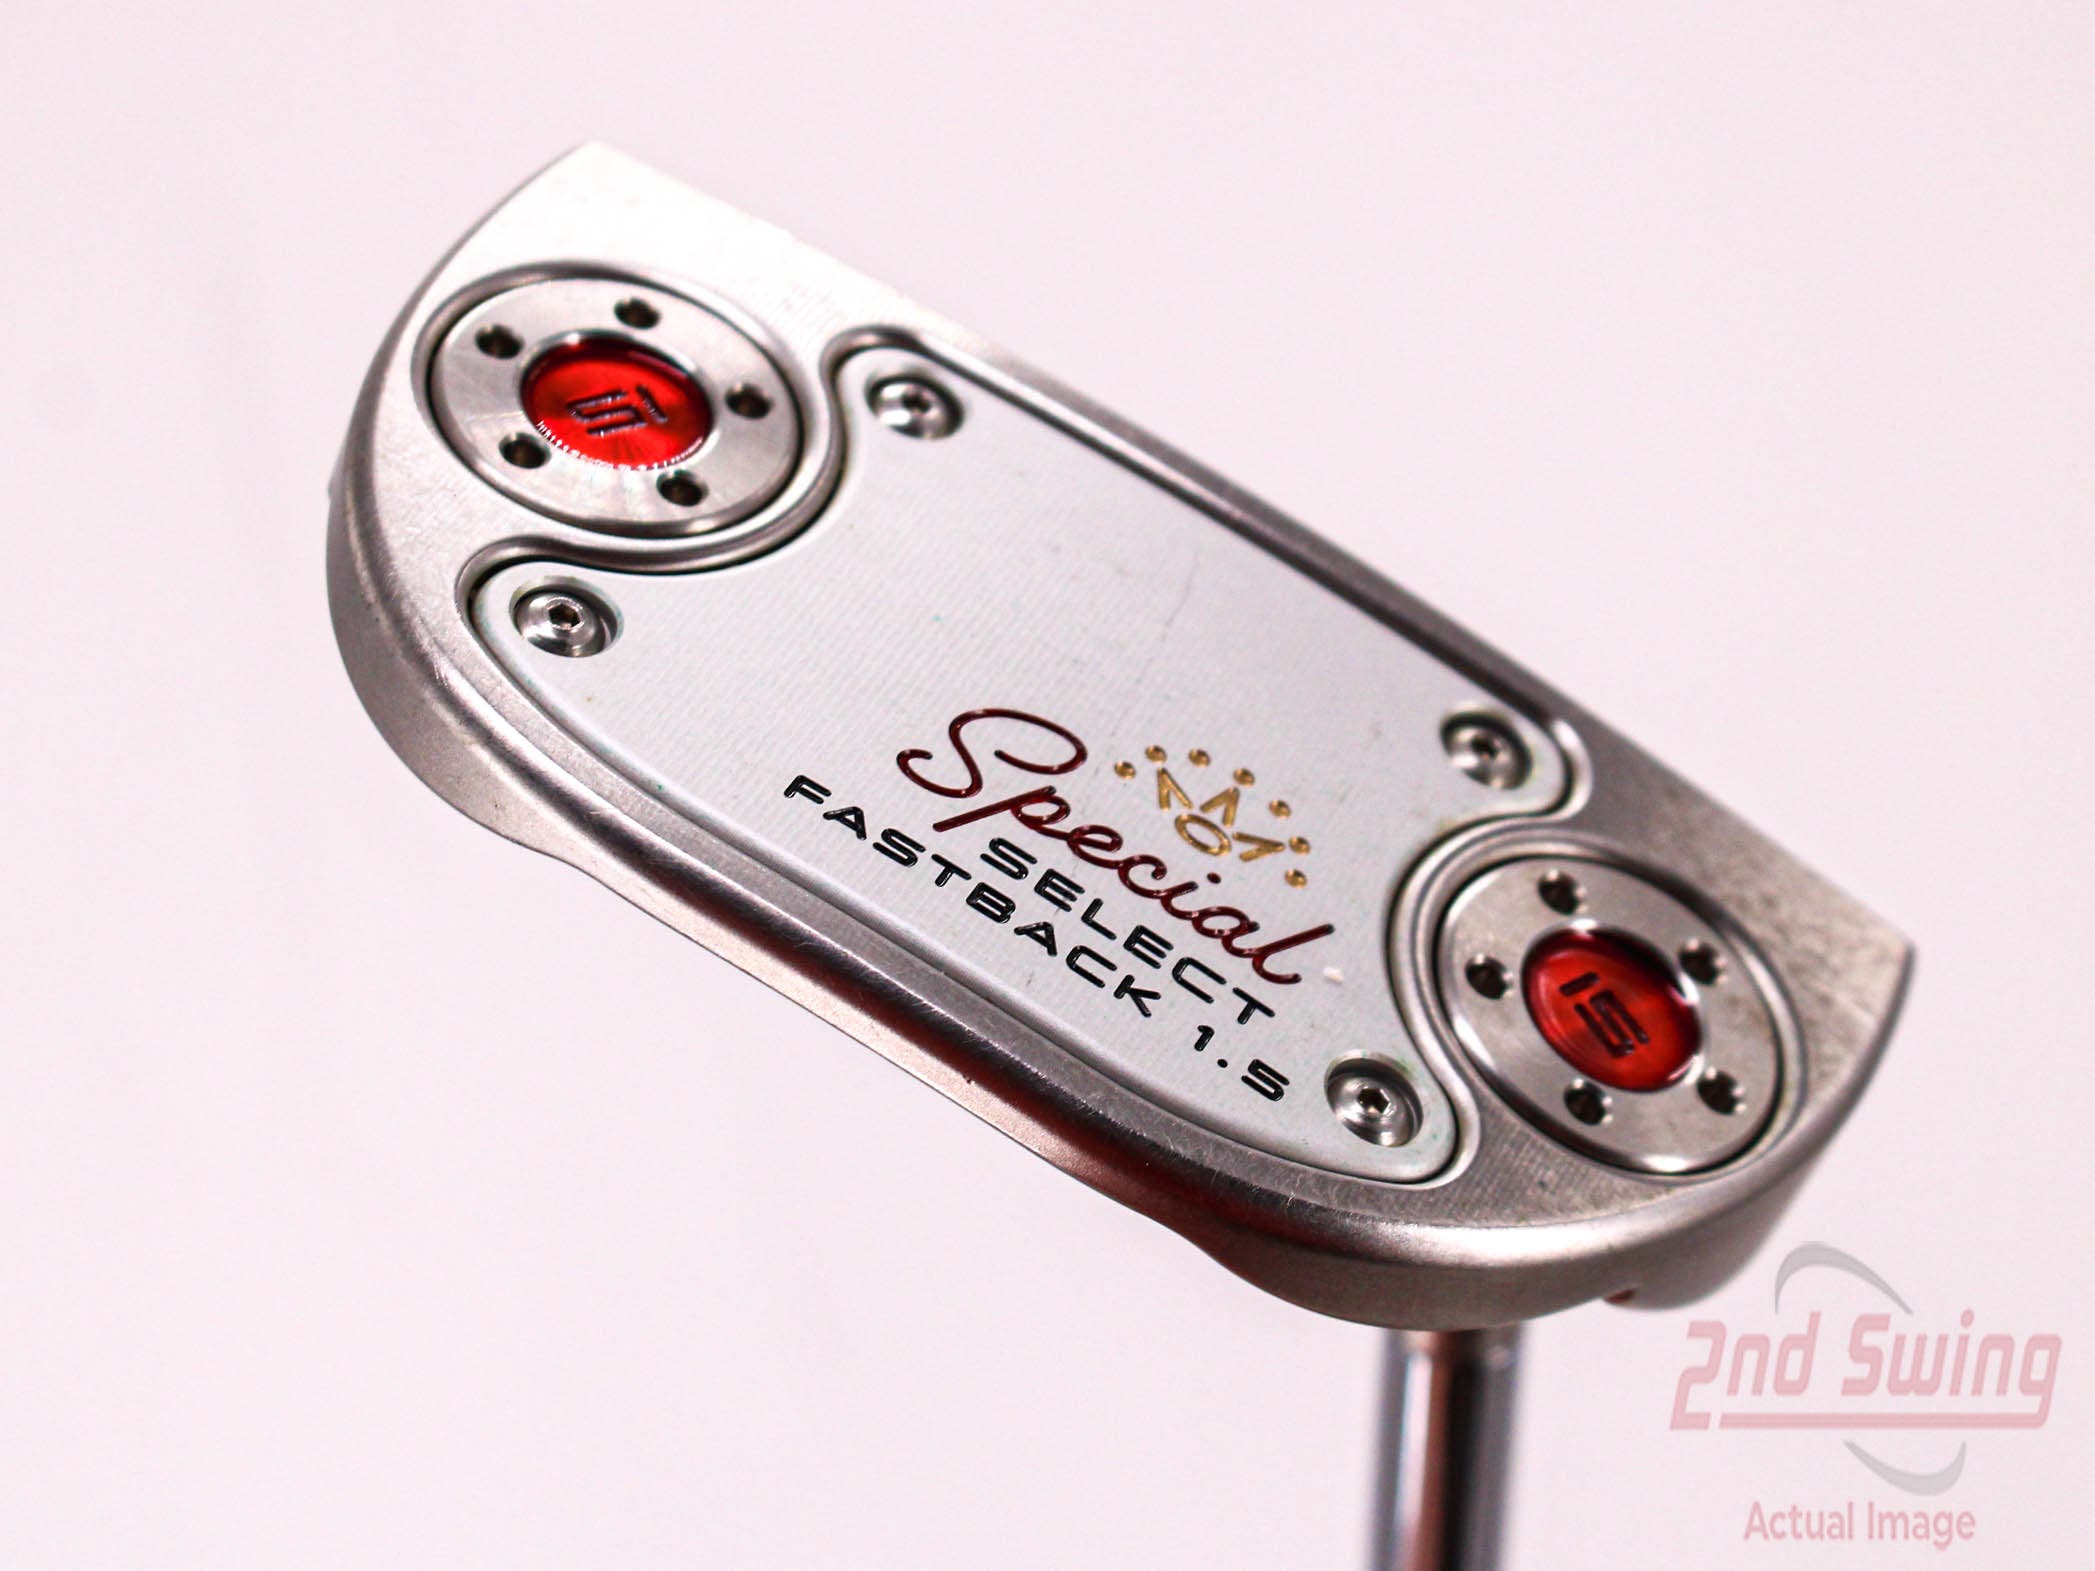 Titleist Scotty Cameron Special Select Fastback 1.5 Putter (D-12328568332) 2nd Swing Golf